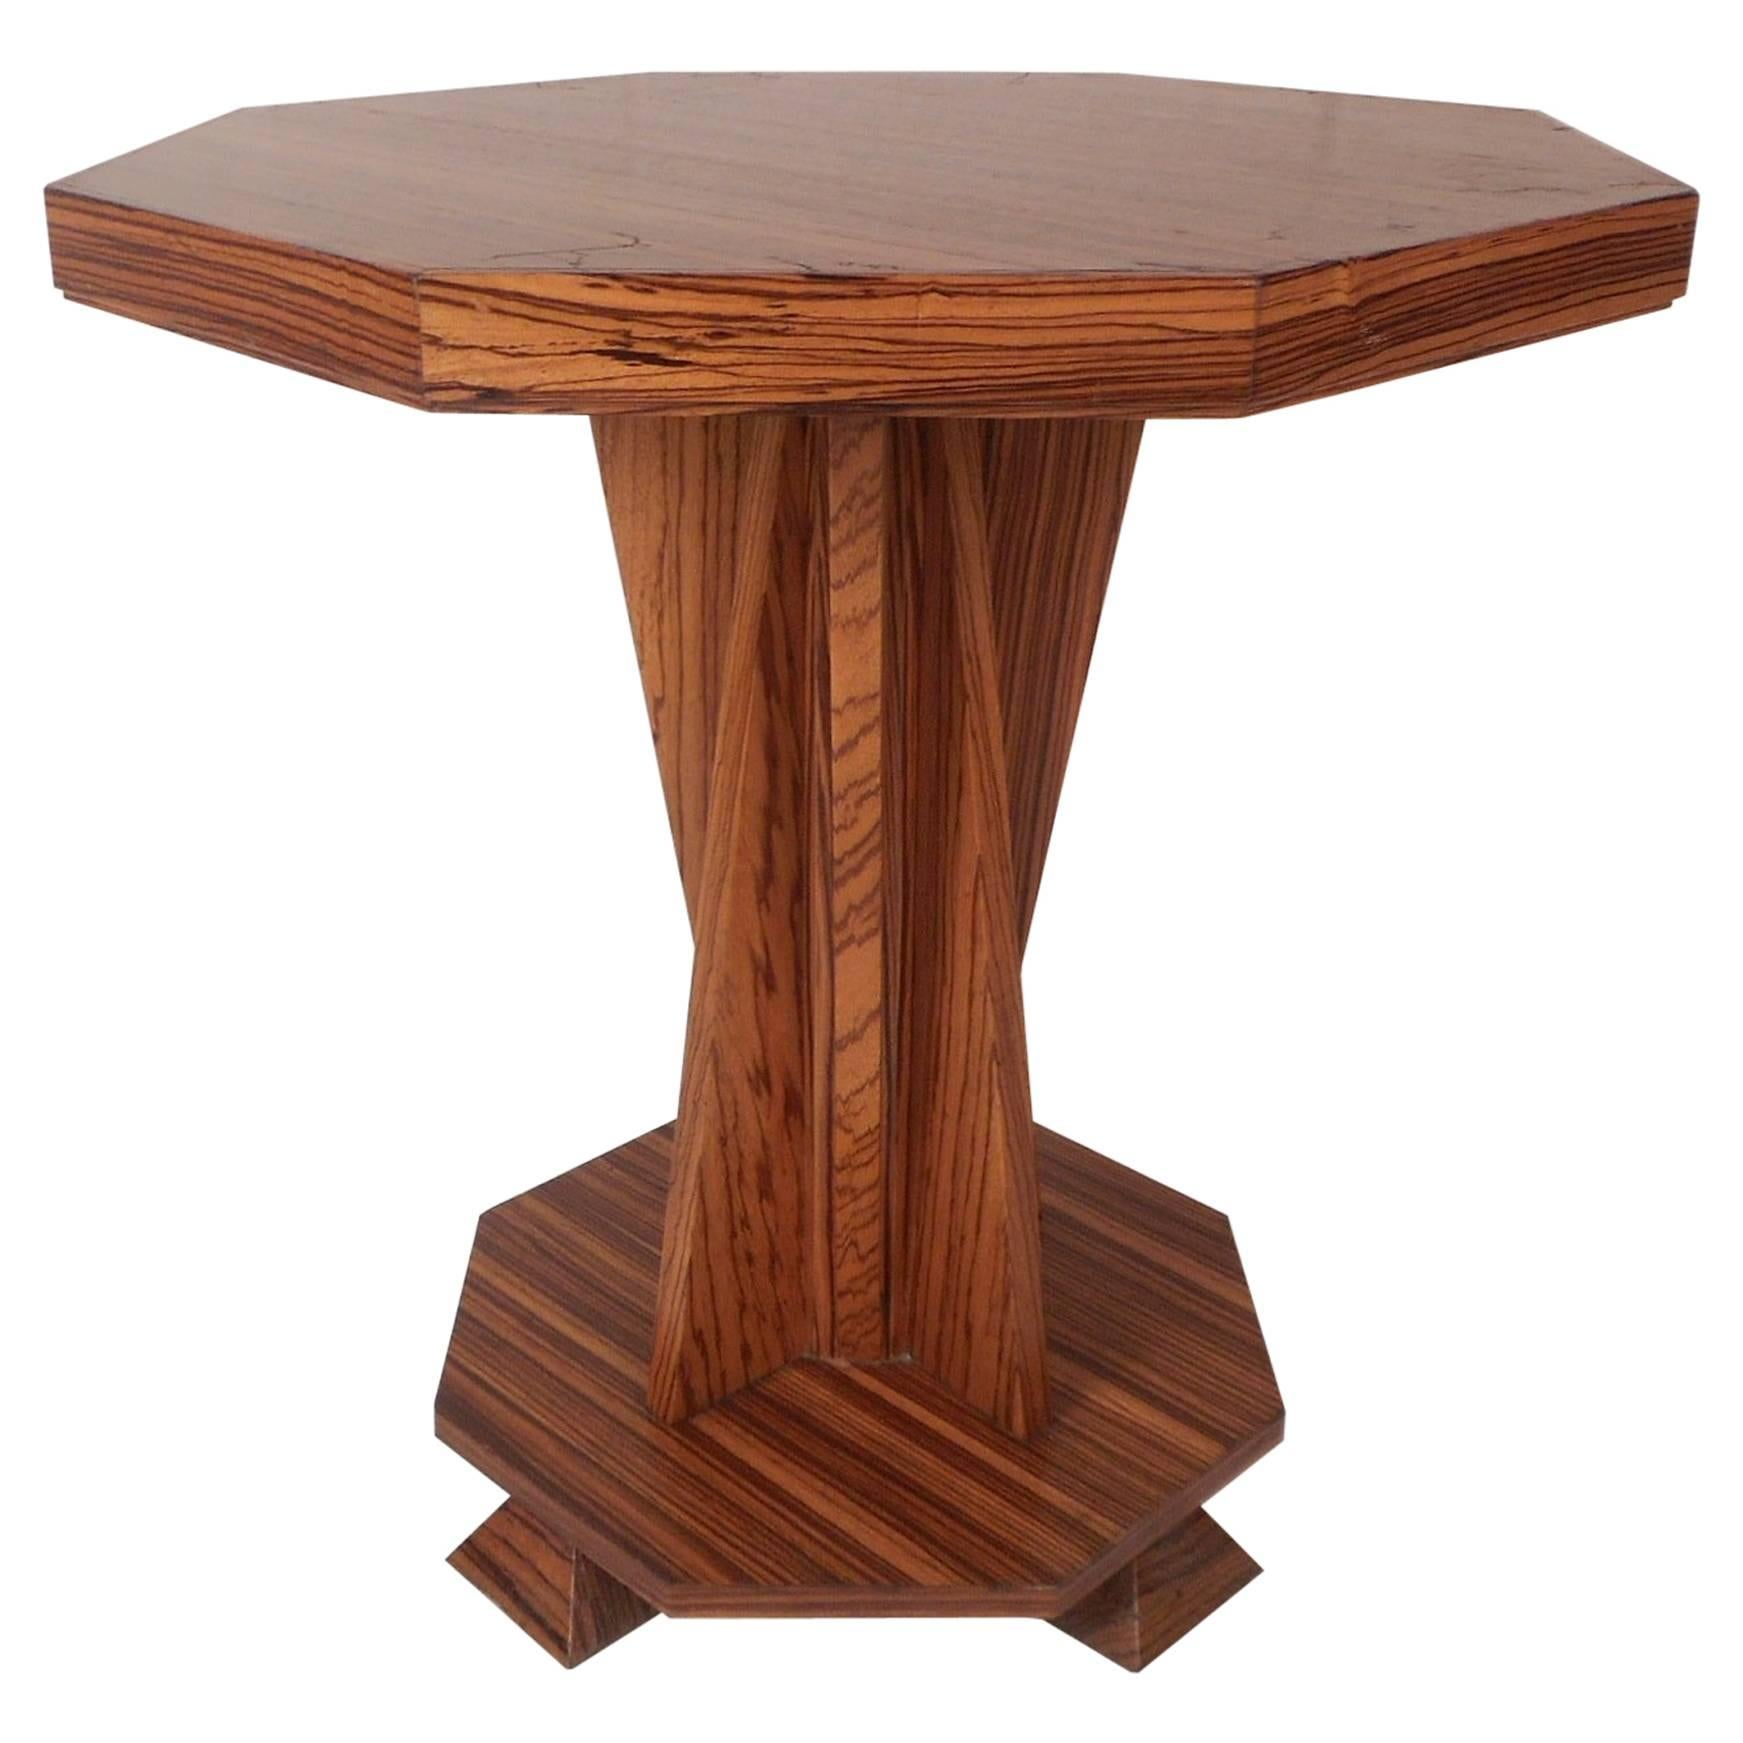 This beautiful custom-made table features a sculpted pedestal base with four trapezoid shaped feet. An excellent design with an octagonal base that can be used for added storage. This handmade end table has angled wood running vertically down the